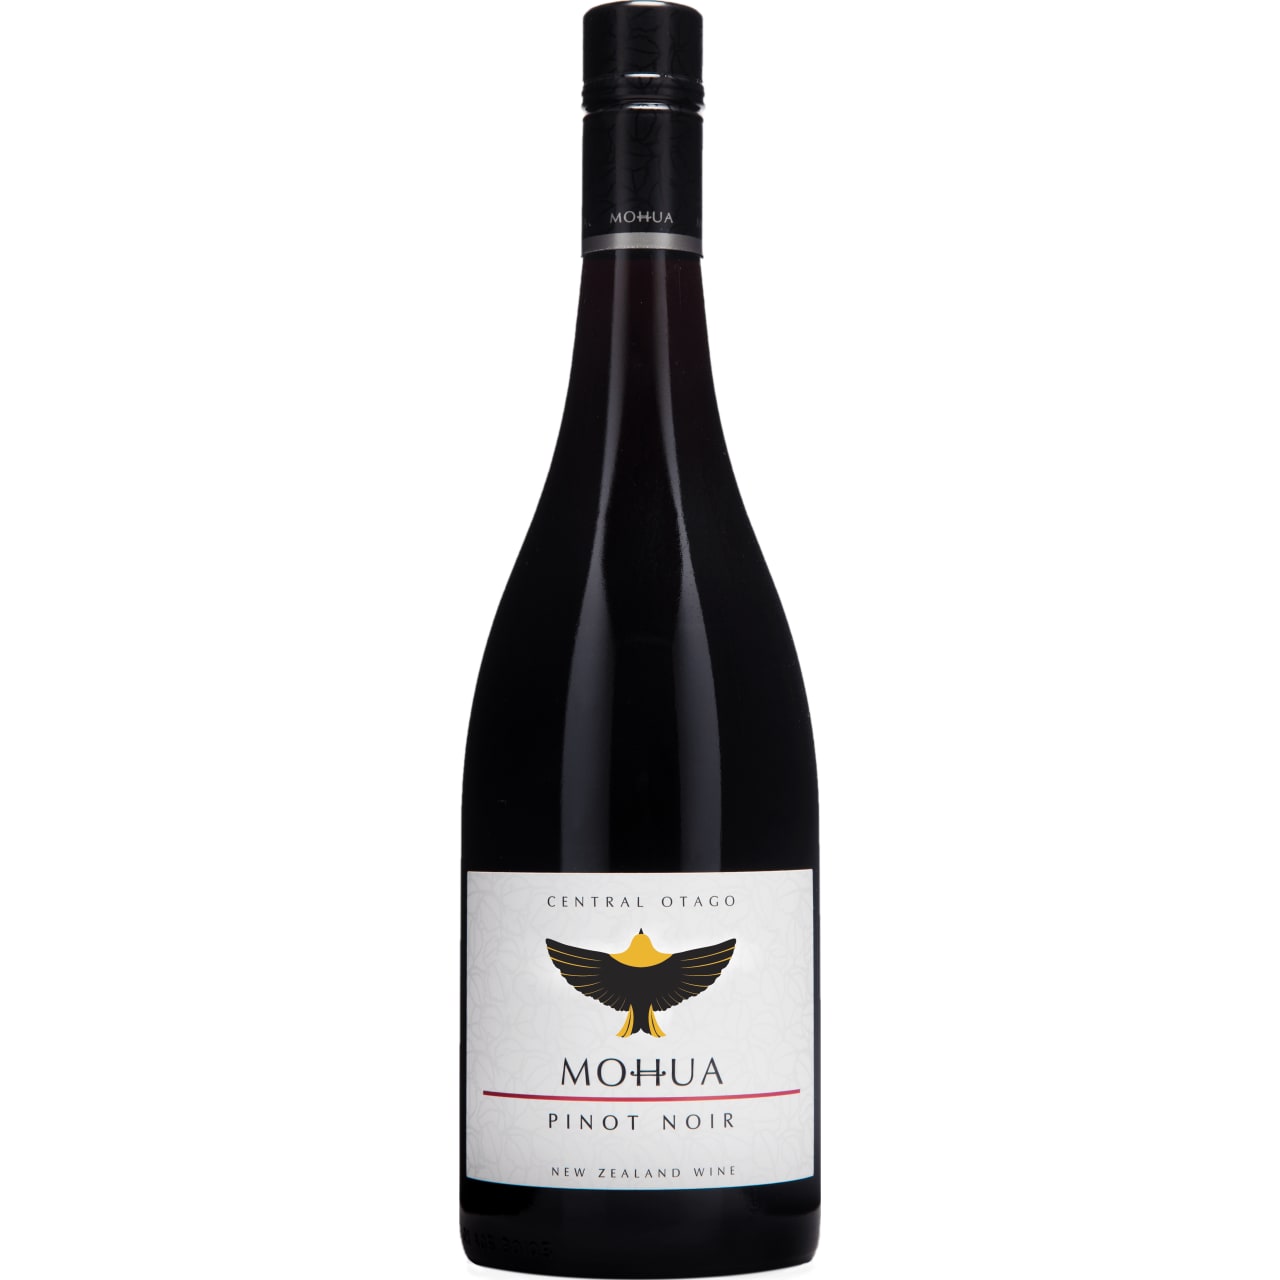 A floral scented rich and juicy Pinot Noir. Layered with fine tannins, raspberry and blackcurrant, wild strawberry and spice flavours.